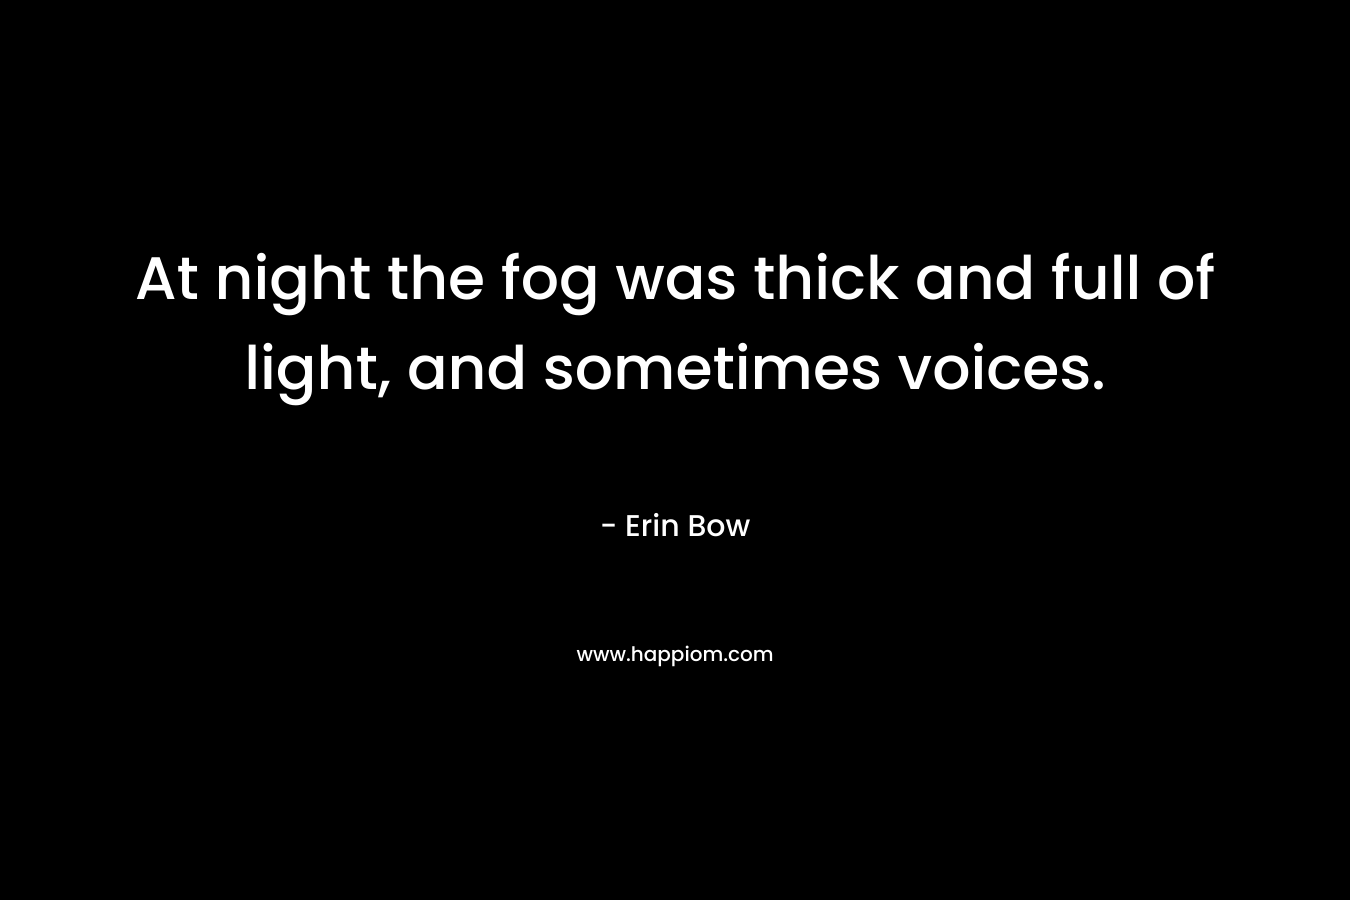 At night the fog was thick and full of light, and sometimes voices. – Erin Bow